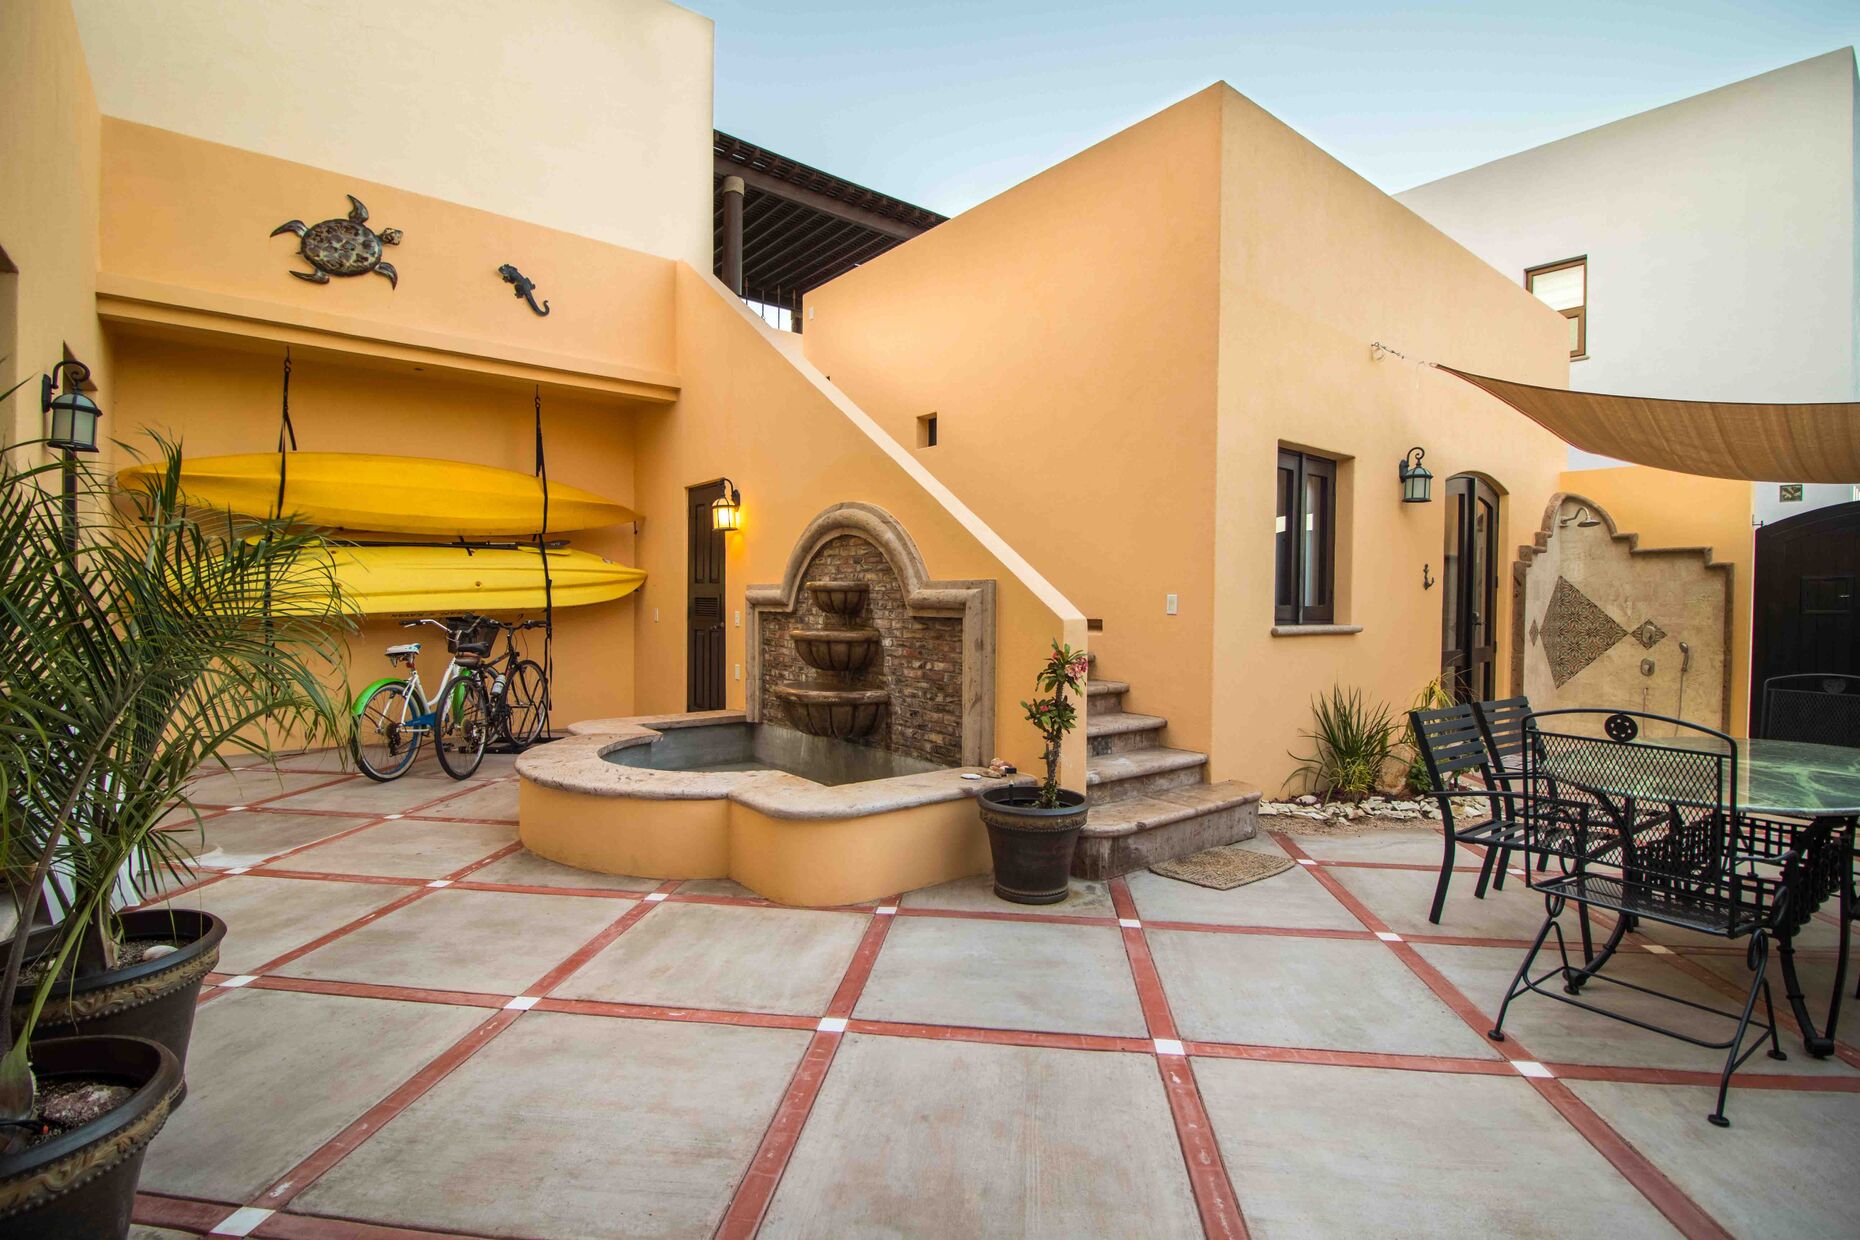 Courtyard, an exquisite fountain with a small dipping pool.Bikes available for guest